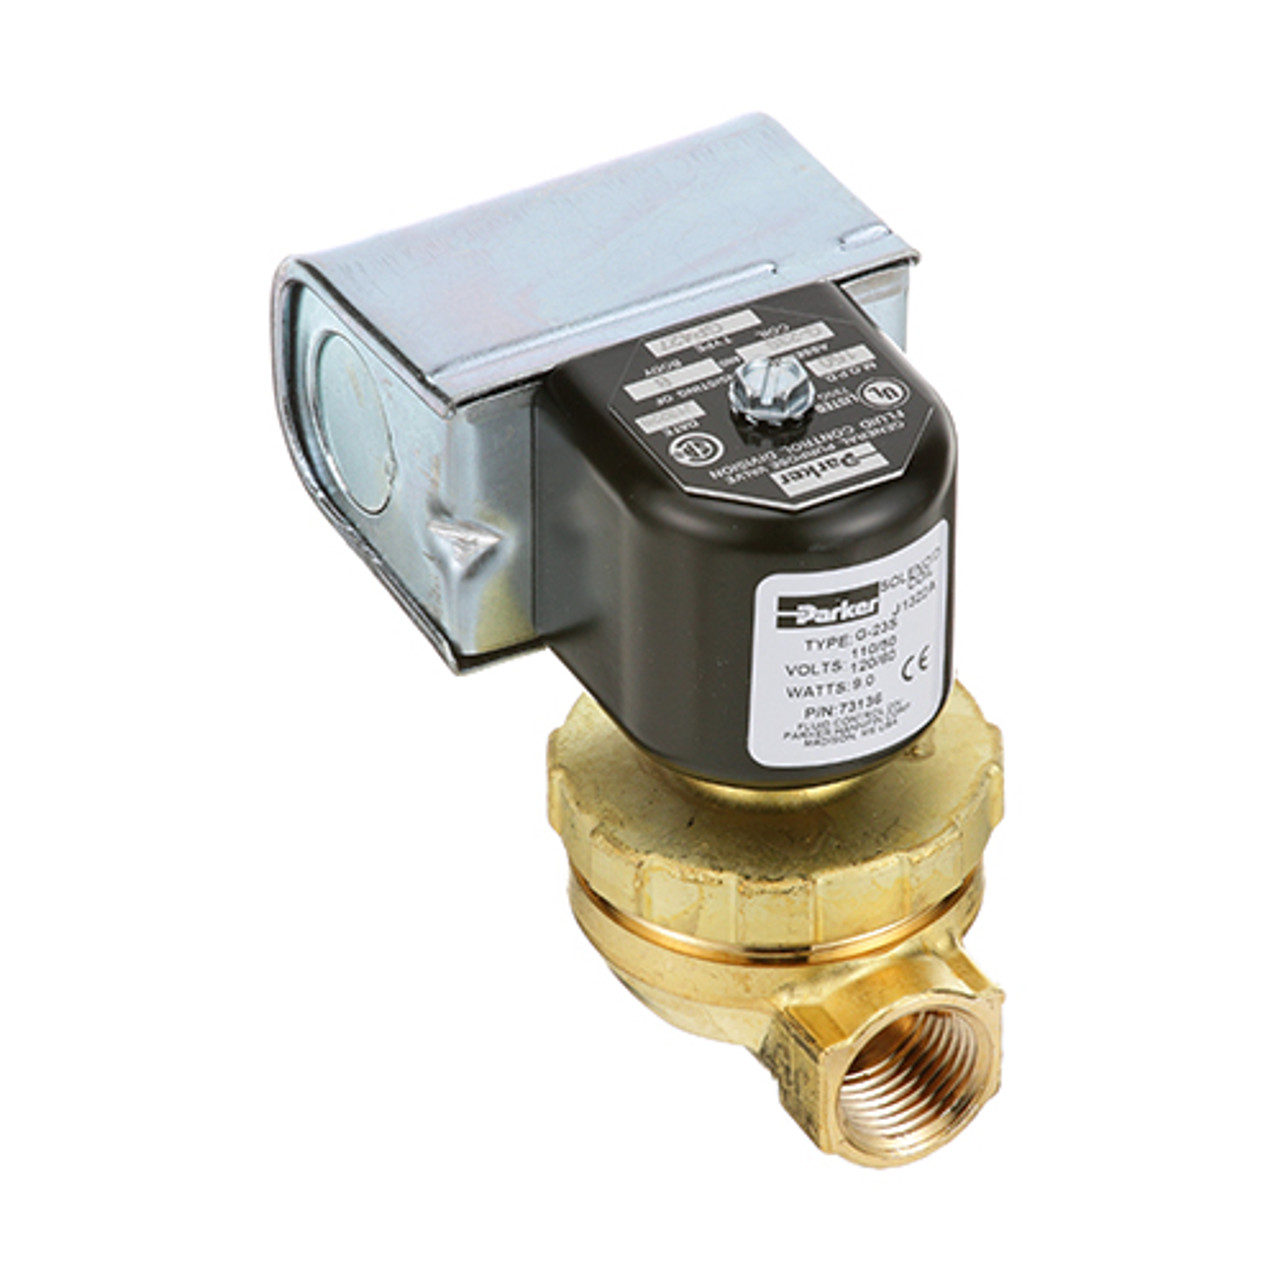 1/2 Solenoid Valve - Replacement Part For Hobart 00-435968-00001